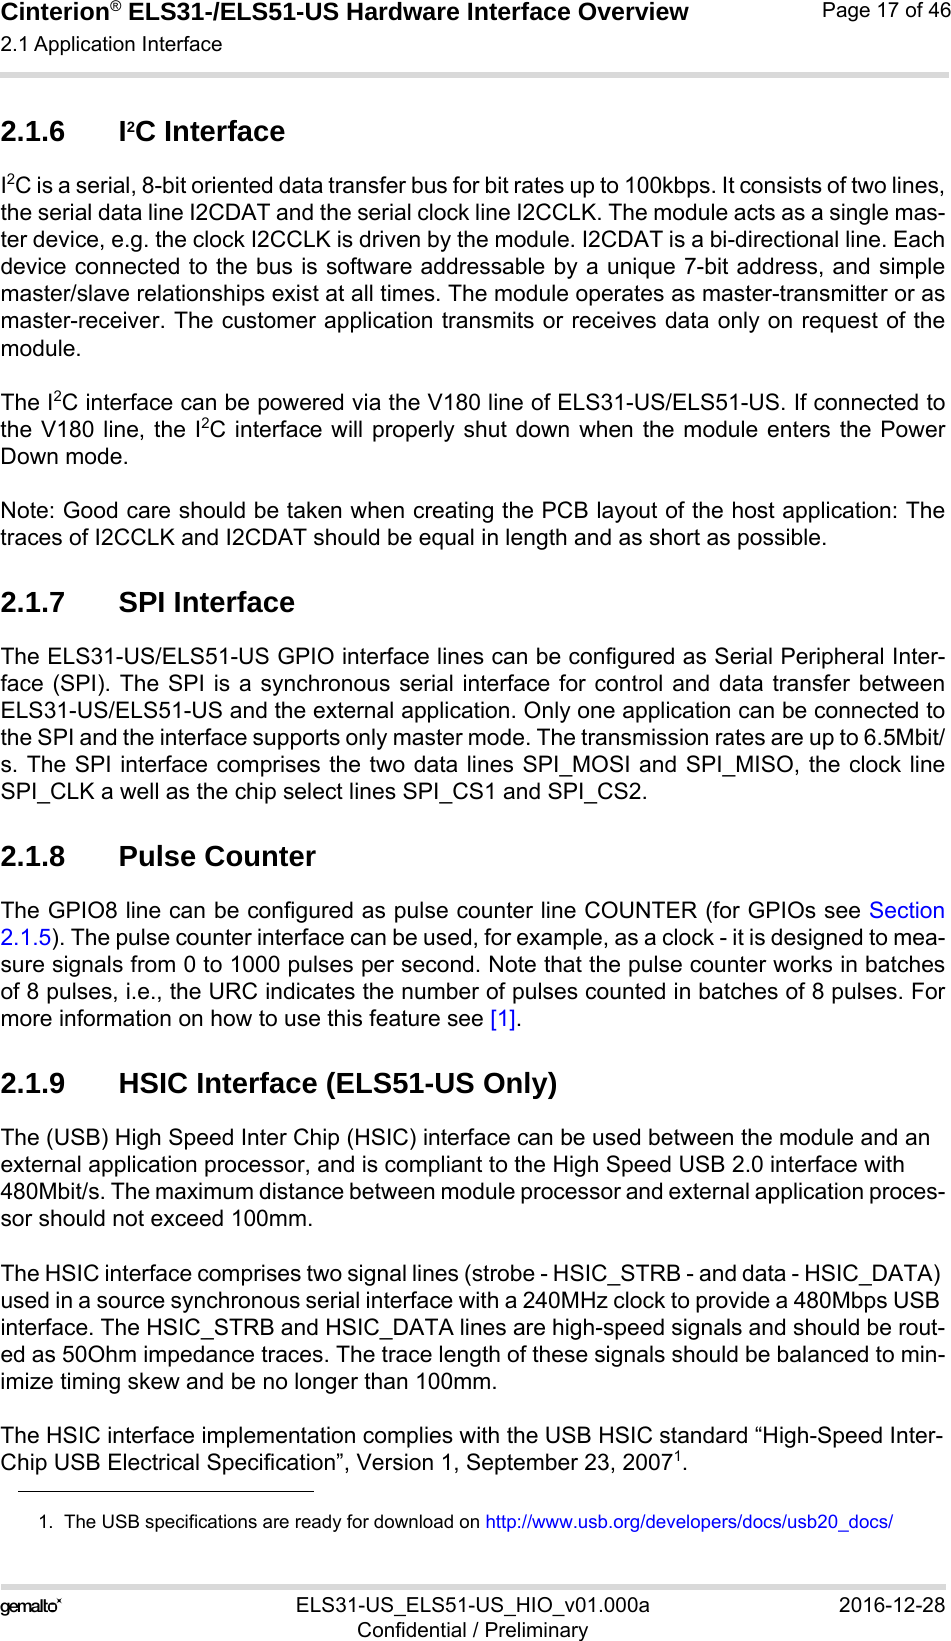 Cinterion® ELS31-/ELS51-US Hardware Interface Overview2.1 Application Interface29ELS31-US_ELS51-US_HIO_v01.000a 2016-12-28Confidential / PreliminaryPage 17 of 462.1.6 I2C InterfaceI2C is a serial, 8-bit oriented data transfer bus for bit rates up to 100kbps. It consists of two lines,the serial data line I2CDAT and the serial clock line I2CCLK. The module acts as a single mas-ter device, e.g. the clock I2CCLK is driven by the module. I2CDAT is a bi-directional line. Eachdevice connected to the bus is software addressable by a unique 7-bit address, and simplemaster/slave relationships exist at all times. The module operates as master-transmitter or asmaster-receiver. The customer application transmits or receives data only on request of themodule.The I2C interface can be powered via the V180 line of ELS31-US/ELS51-US. If connected tothe V180 line, the I2C interface will properly shut down when the module enters the PowerDown mode.Note: Good care should be taken when creating the PCB layout of the host application: Thetraces of I2CCLK and I2CDAT should be equal in length and as short as possible.2.1.7 SPI InterfaceThe ELS31-US/ELS51-US GPIO interface lines can be configured as Serial Peripheral Inter-face (SPI). The SPI is a synchronous serial interface for control and data transfer betweenELS31-US/ELS51-US and the external application. Only one application can be connected tothe SPI and the interface supports only master mode. The transmission rates are up to 6.5Mbit/s. The SPI interface comprises the two data lines SPI_MOSI and SPI_MISO, the clock lineSPI_CLK a well as the chip select lines SPI_CS1 and SPI_CS2.2.1.8 Pulse CounterThe GPIO8 line can be configured as pulse counter line COUNTER (for GPIOs see Section2.1.5). The pulse counter interface can be used, for example, as a clock - it is designed to mea-sure signals from 0 to 1000 pulses per second. Note that the pulse counter works in batchesof 8 pulses, i.e., the URC indicates the number of pulses counted in batches of 8 pulses. Formore information on how to use this feature see [1].2.1.9 HSIC Interface (ELS51-US Only)The (USB) High Speed Inter Chip (HSIC) interface can be used between the module and an external application processor, and is compliant to the High Speed USB 2.0 interface with 480Mbit/s. The maximum distance between module processor and external application proces-sor should not exceed 100mm.The HSIC interface comprises two signal lines (strobe - HSIC_STRB - and data - HSIC_DATA) used in a source synchronous serial interface with a 240MHz clock to provide a 480Mbps USB interface. The HSIC_STRB and HSIC_DATA lines are high-speed signals and should be rout-ed as 50Ohm impedance traces. The trace length of these signals should be balanced to min-imize timing skew and be no longer than 100mm.The HSIC interface implementation complies with the USB HSIC standard “High-Speed Inter-Chip USB Electrical Specification”, Version 1, September 23, 20071.1.  The USB specifications are ready for download on http://www.usb.org/developers/docs/usb20_docs/